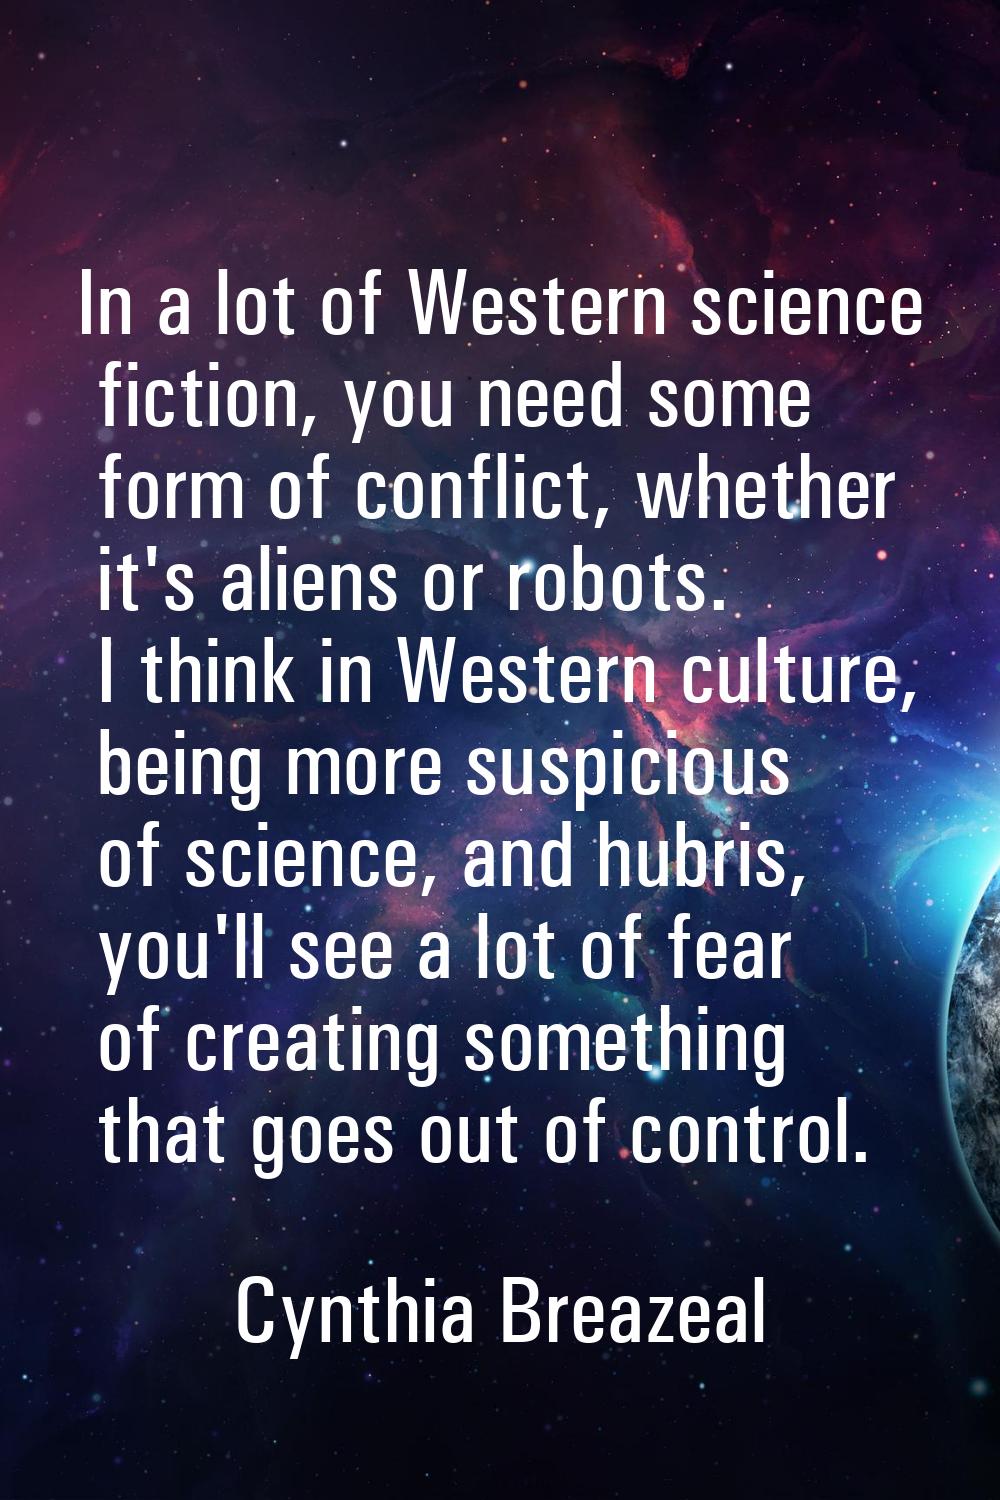 In a lot of Western science fiction, you need some form of conflict, whether it's aliens or robots.